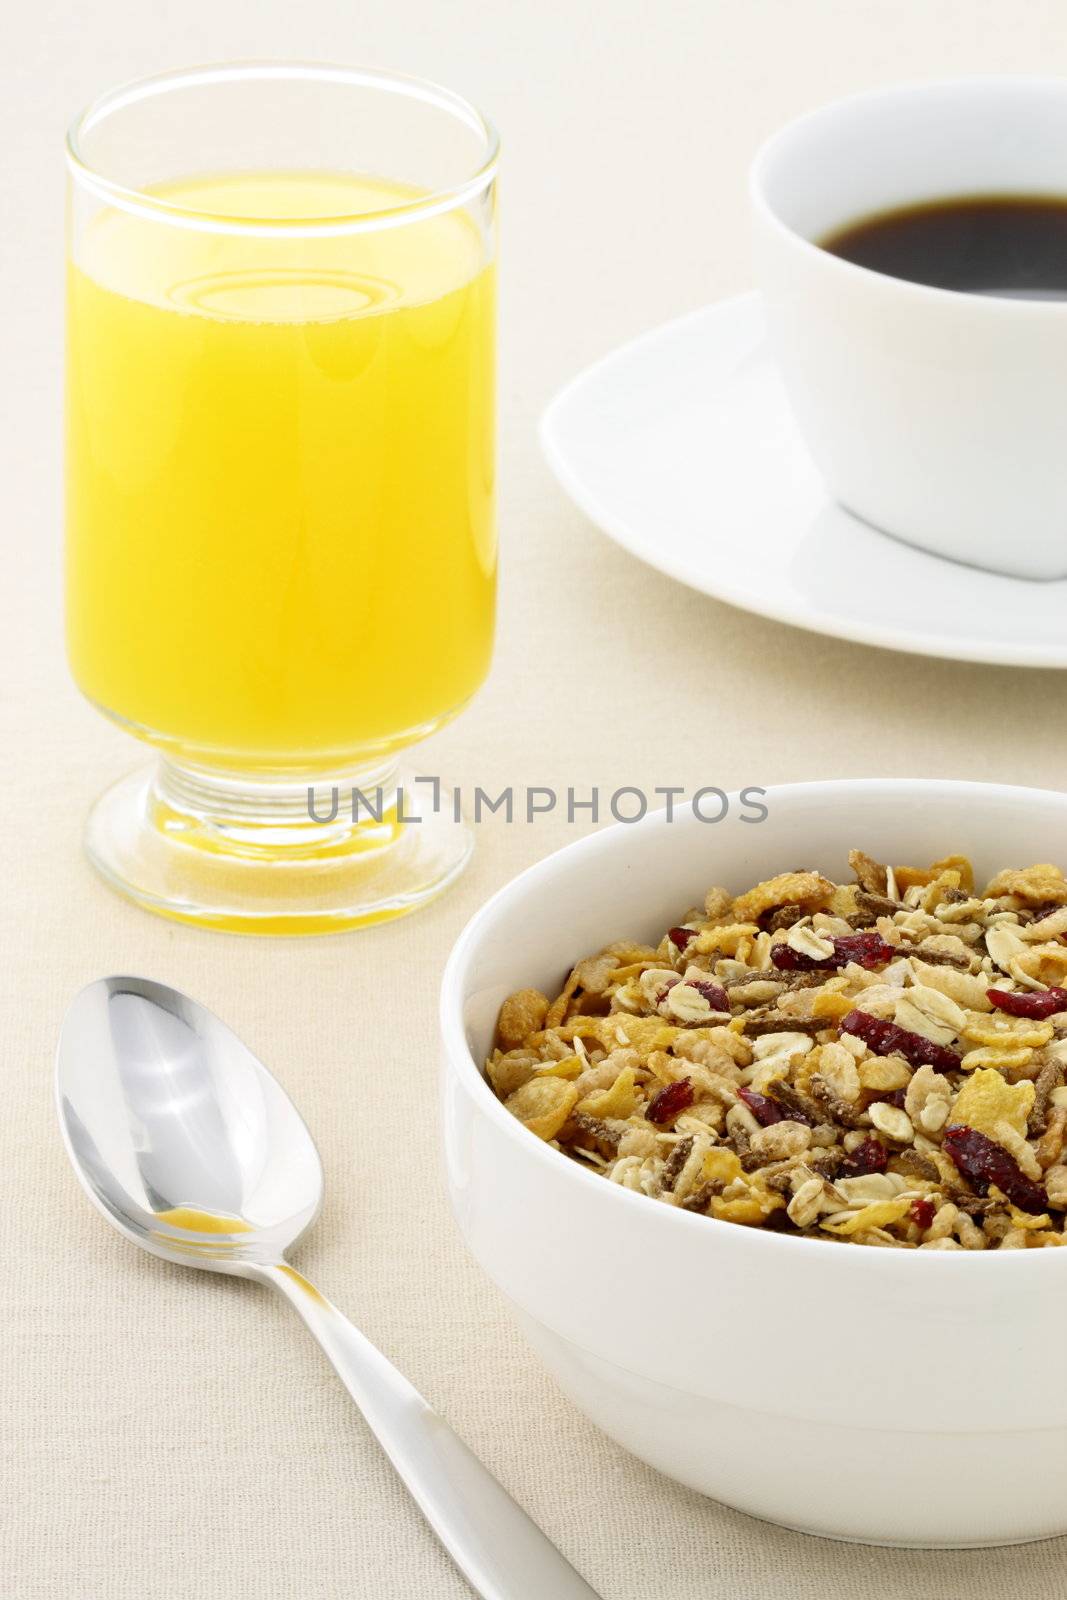 delicious breakfast with fresh orange juice, hot coffee and a healthy bowl of cereal.